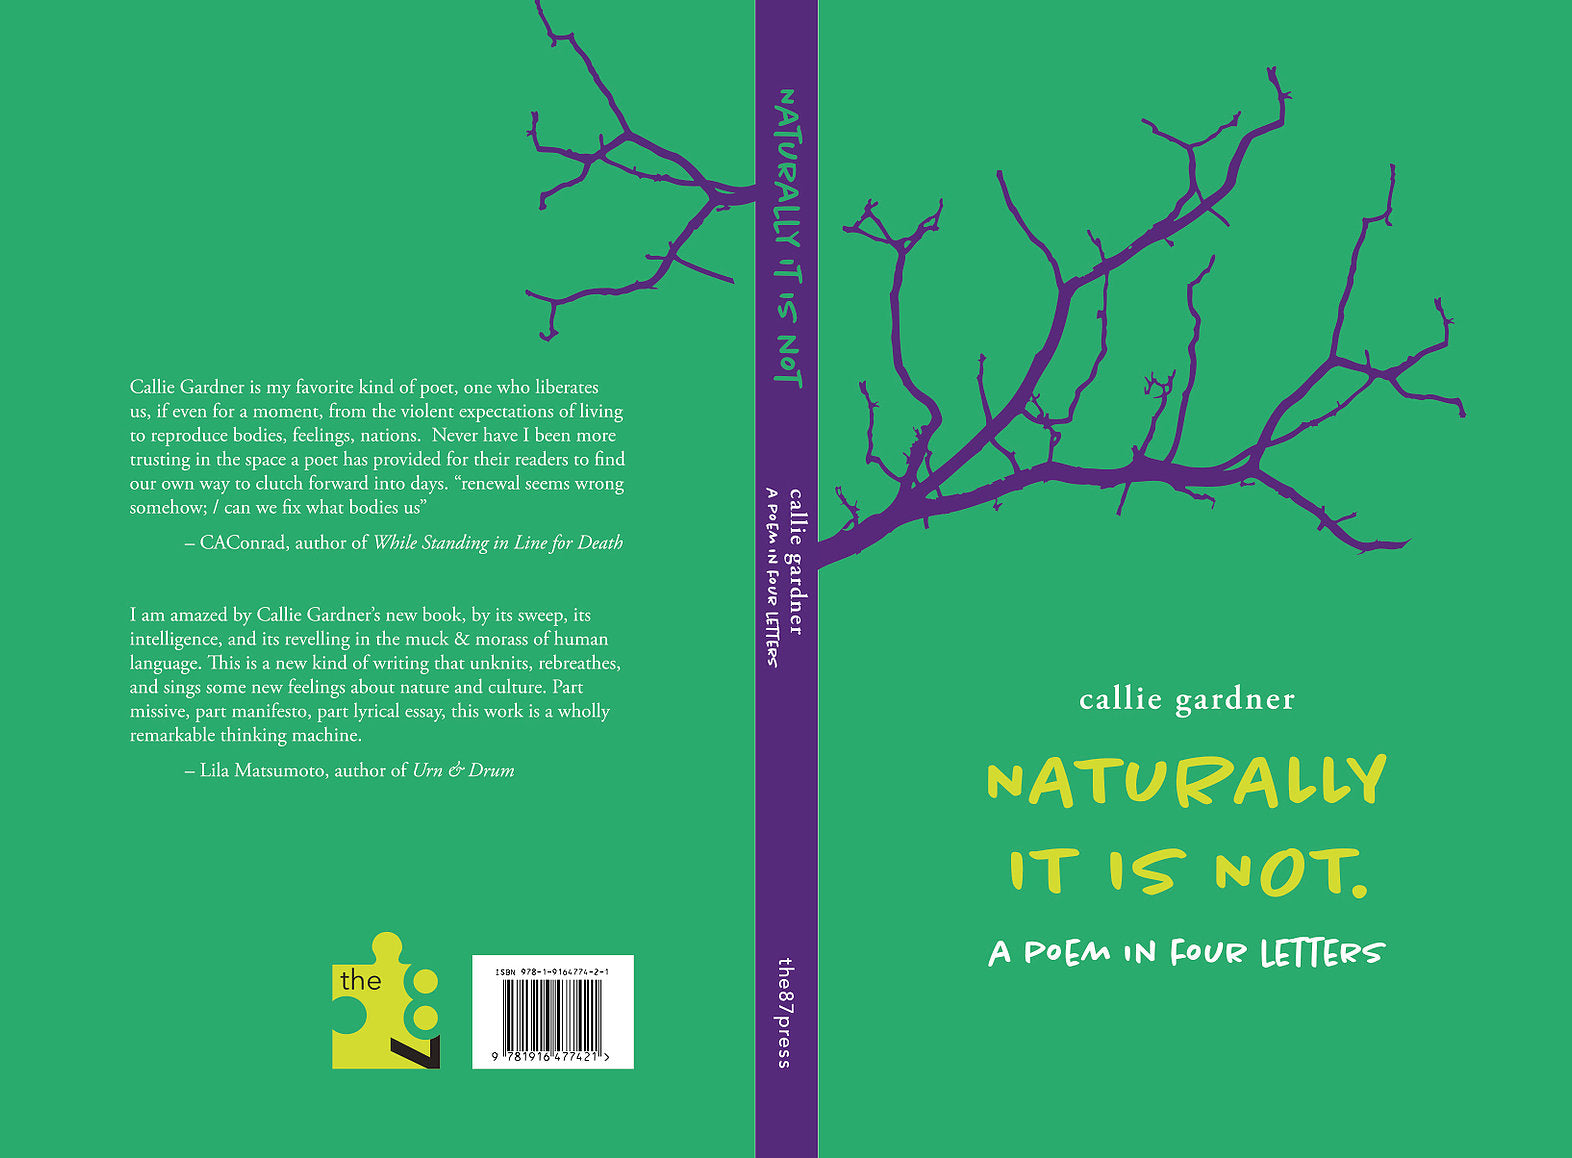 Naturally It Is Not.: A Poem in Four Letters